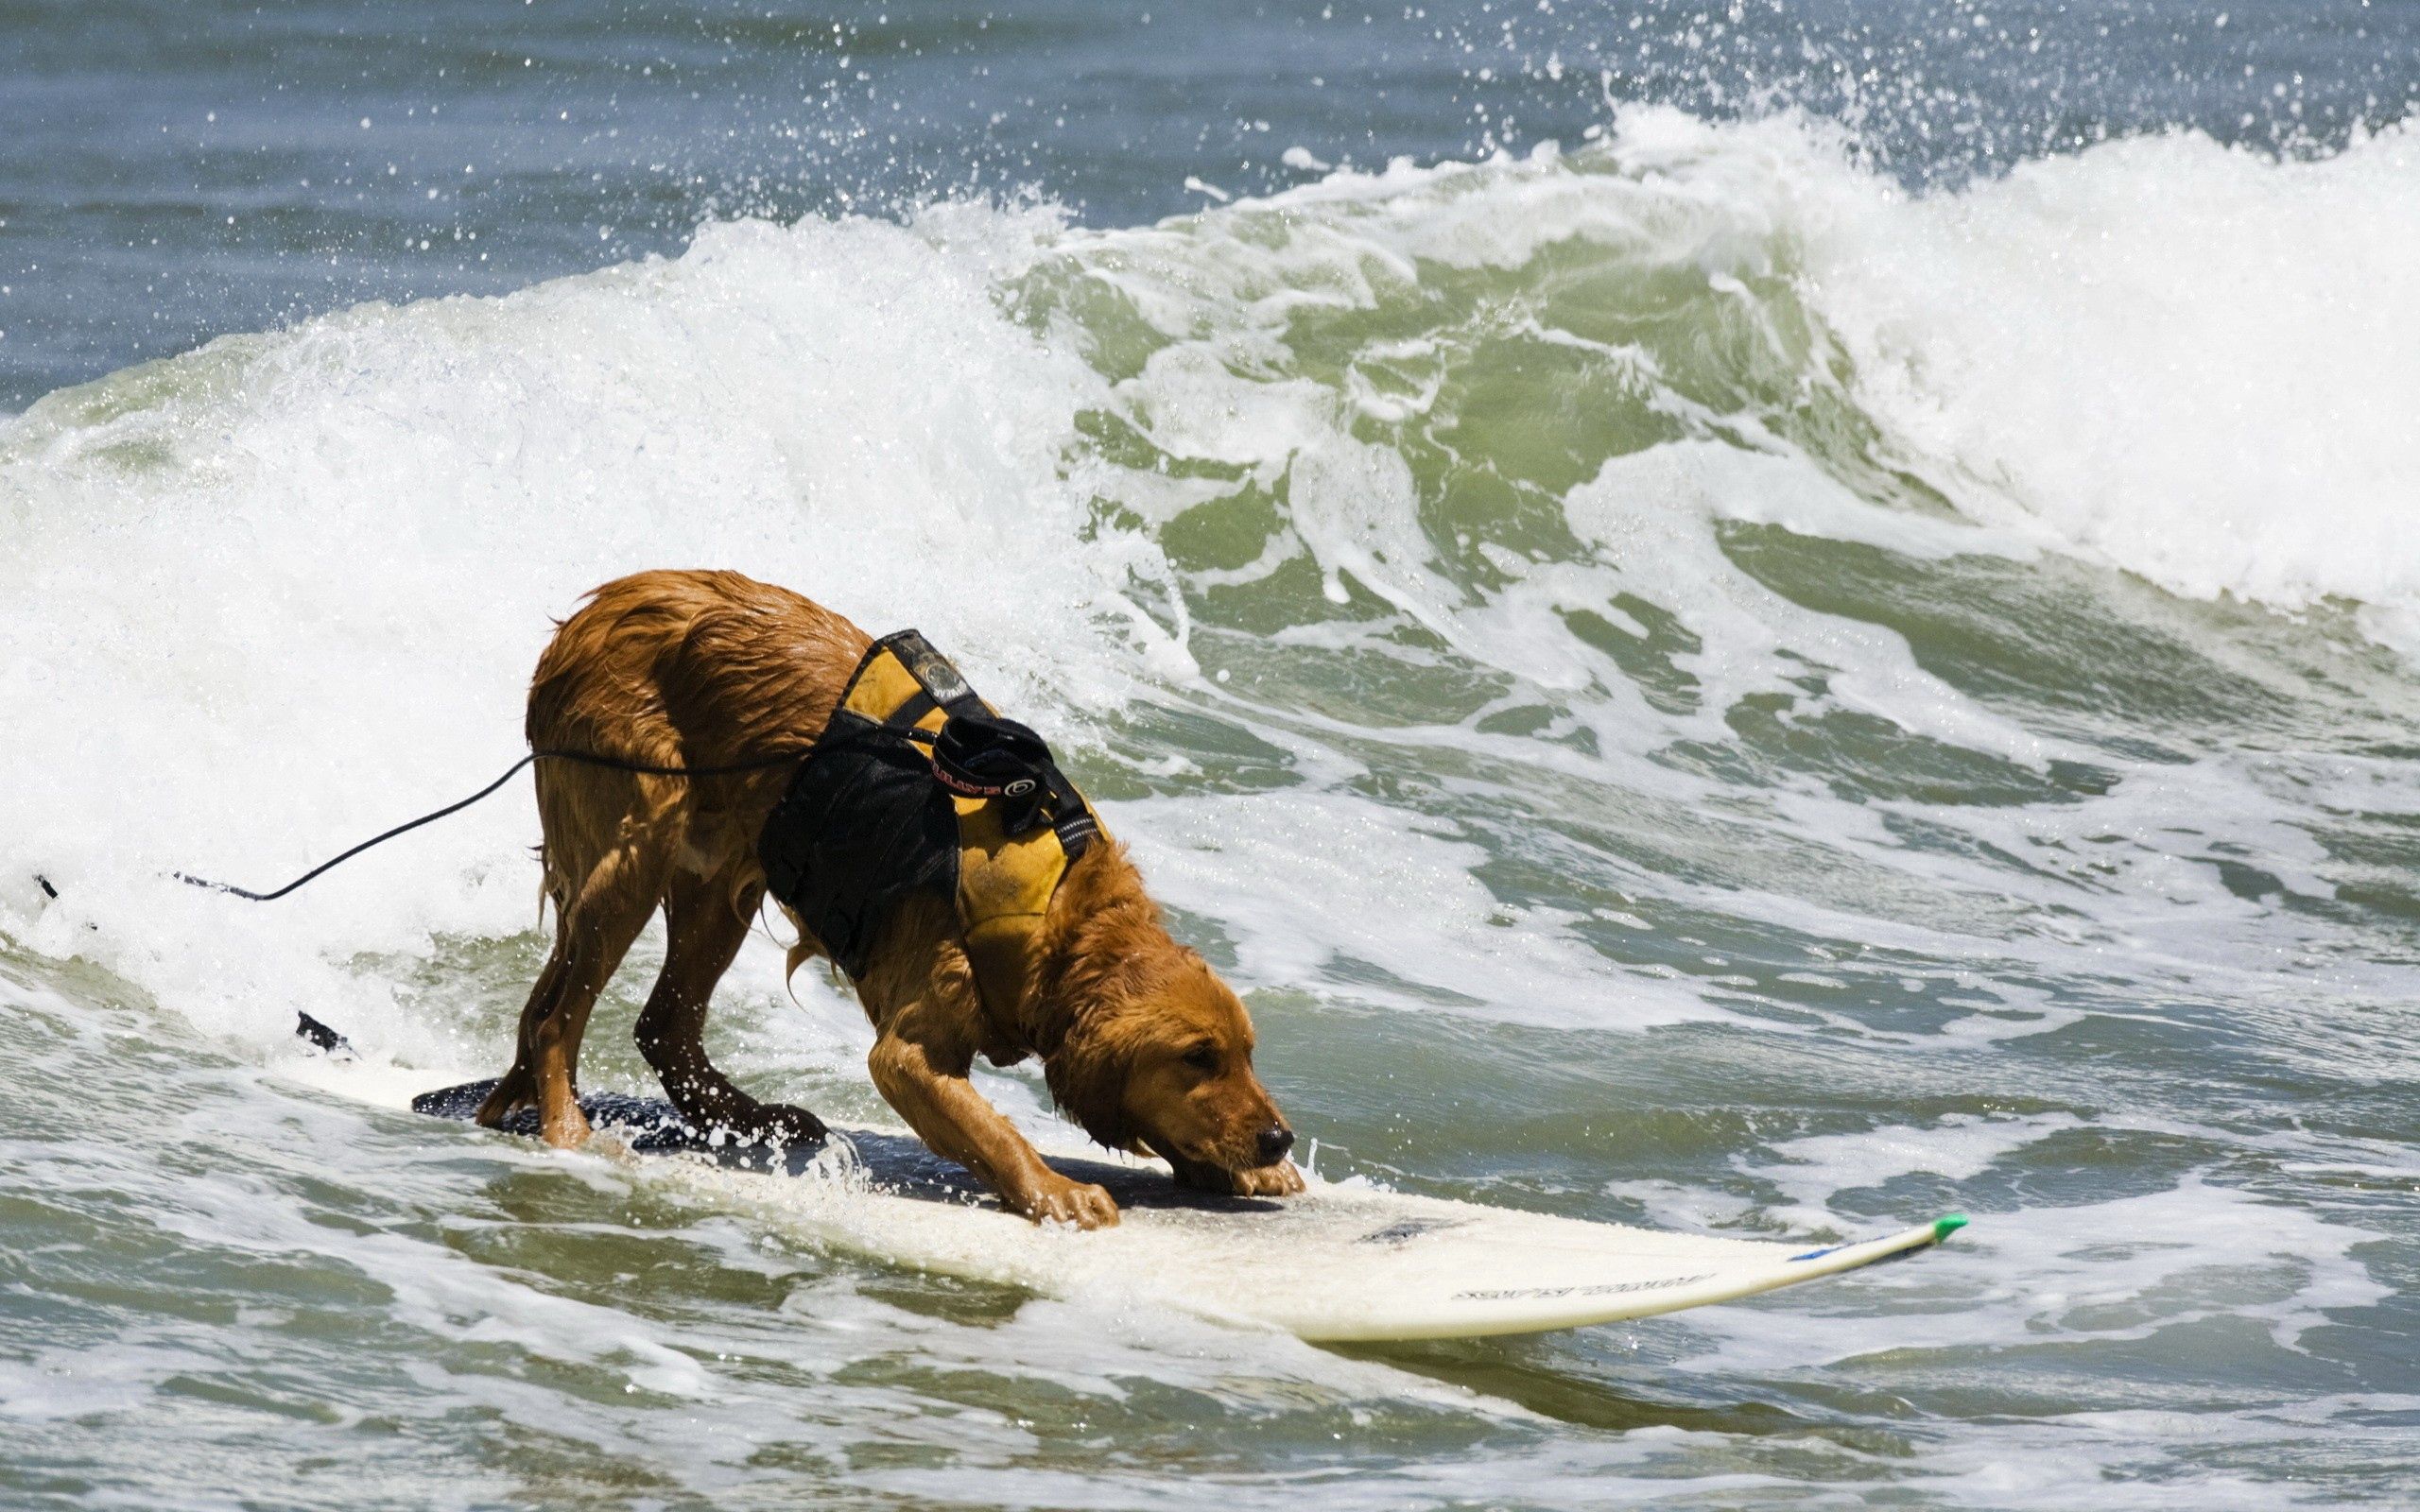 PC Wallpapers animals, water, sea, waves, serfing, dog, surf